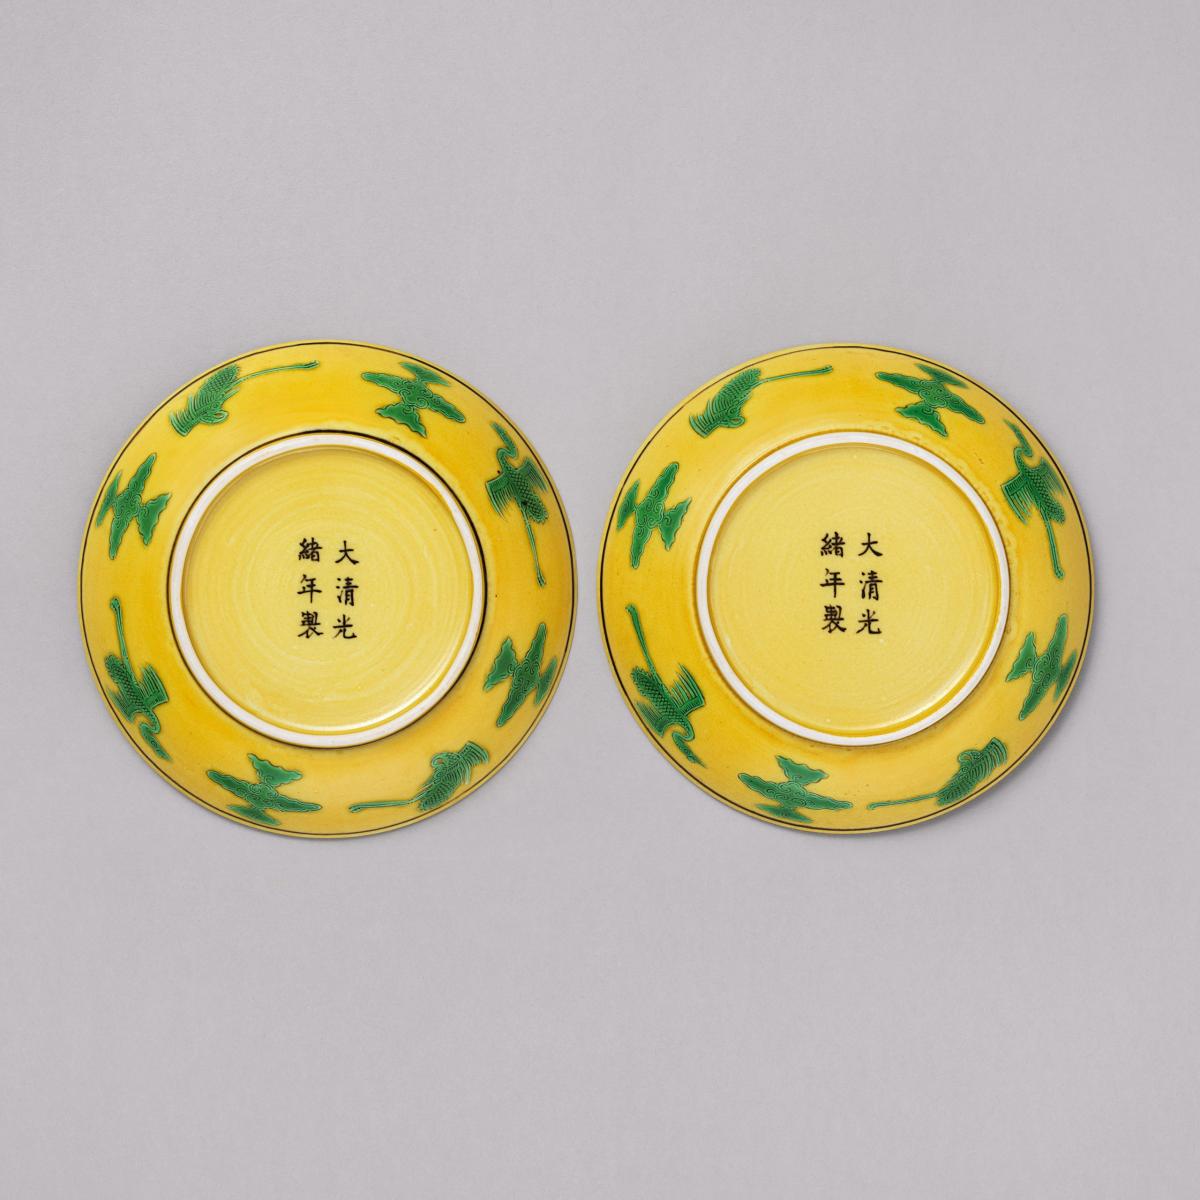 Pair of Chinese imperial porcelain saucer dishes